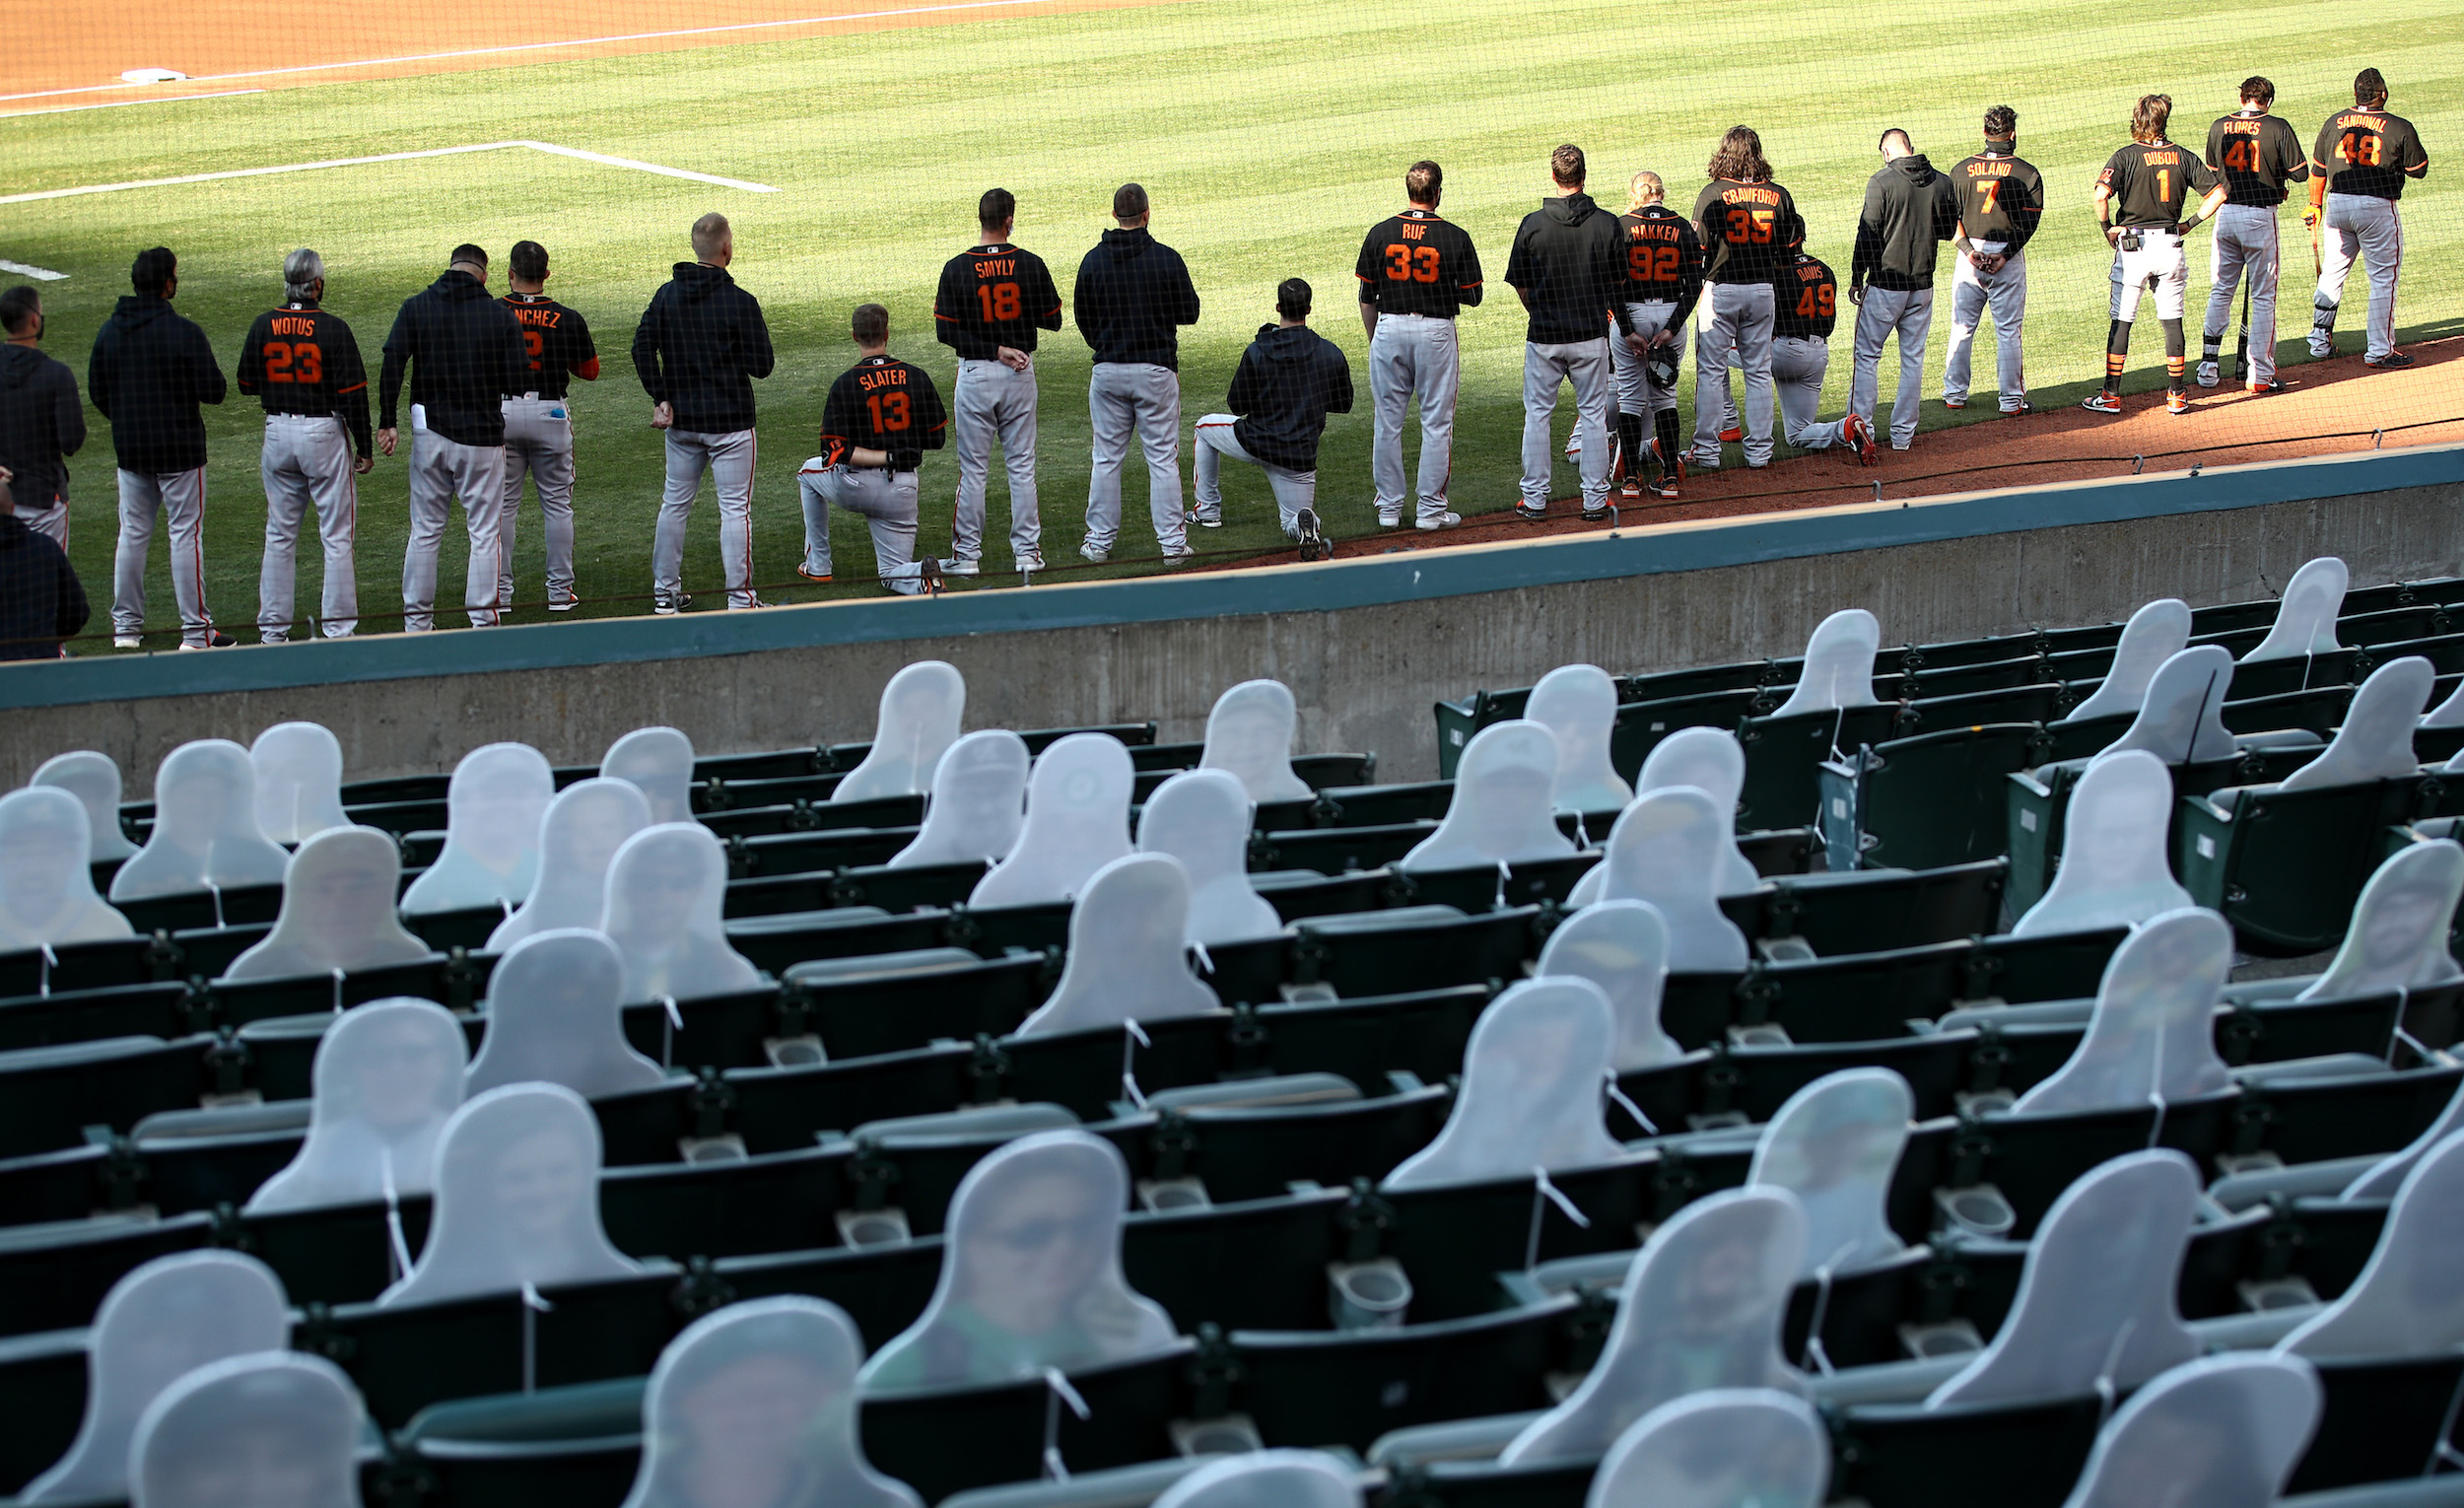 Donald Trump and Aubrey Huff blasted the San Francisco Giants for kneeling during the national anthem.